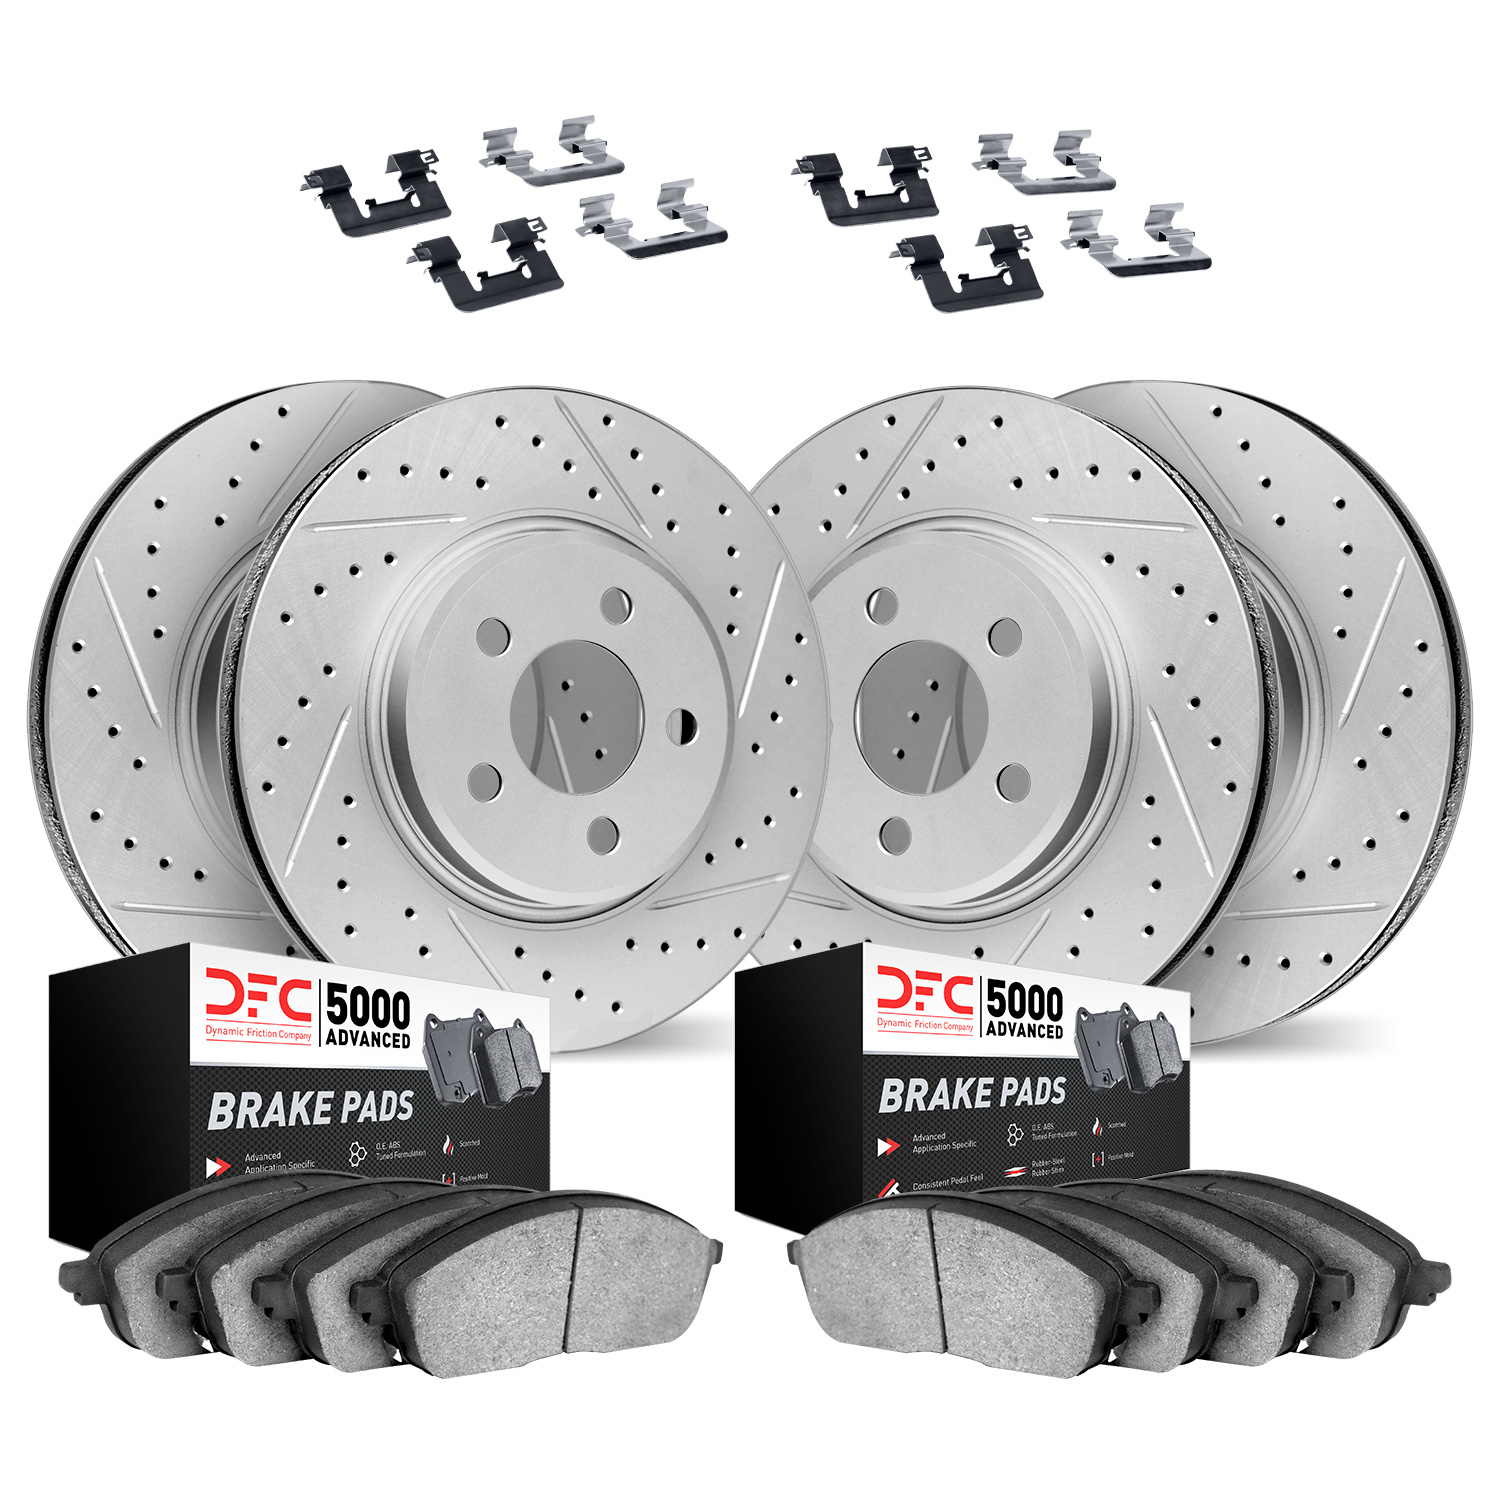 2514-31042 Geoperformance Drilled/Slotted Rotors w/5000 Advanced Brake Pads Kit & Hardware, 2002-2006 BMW, Position: Front and R